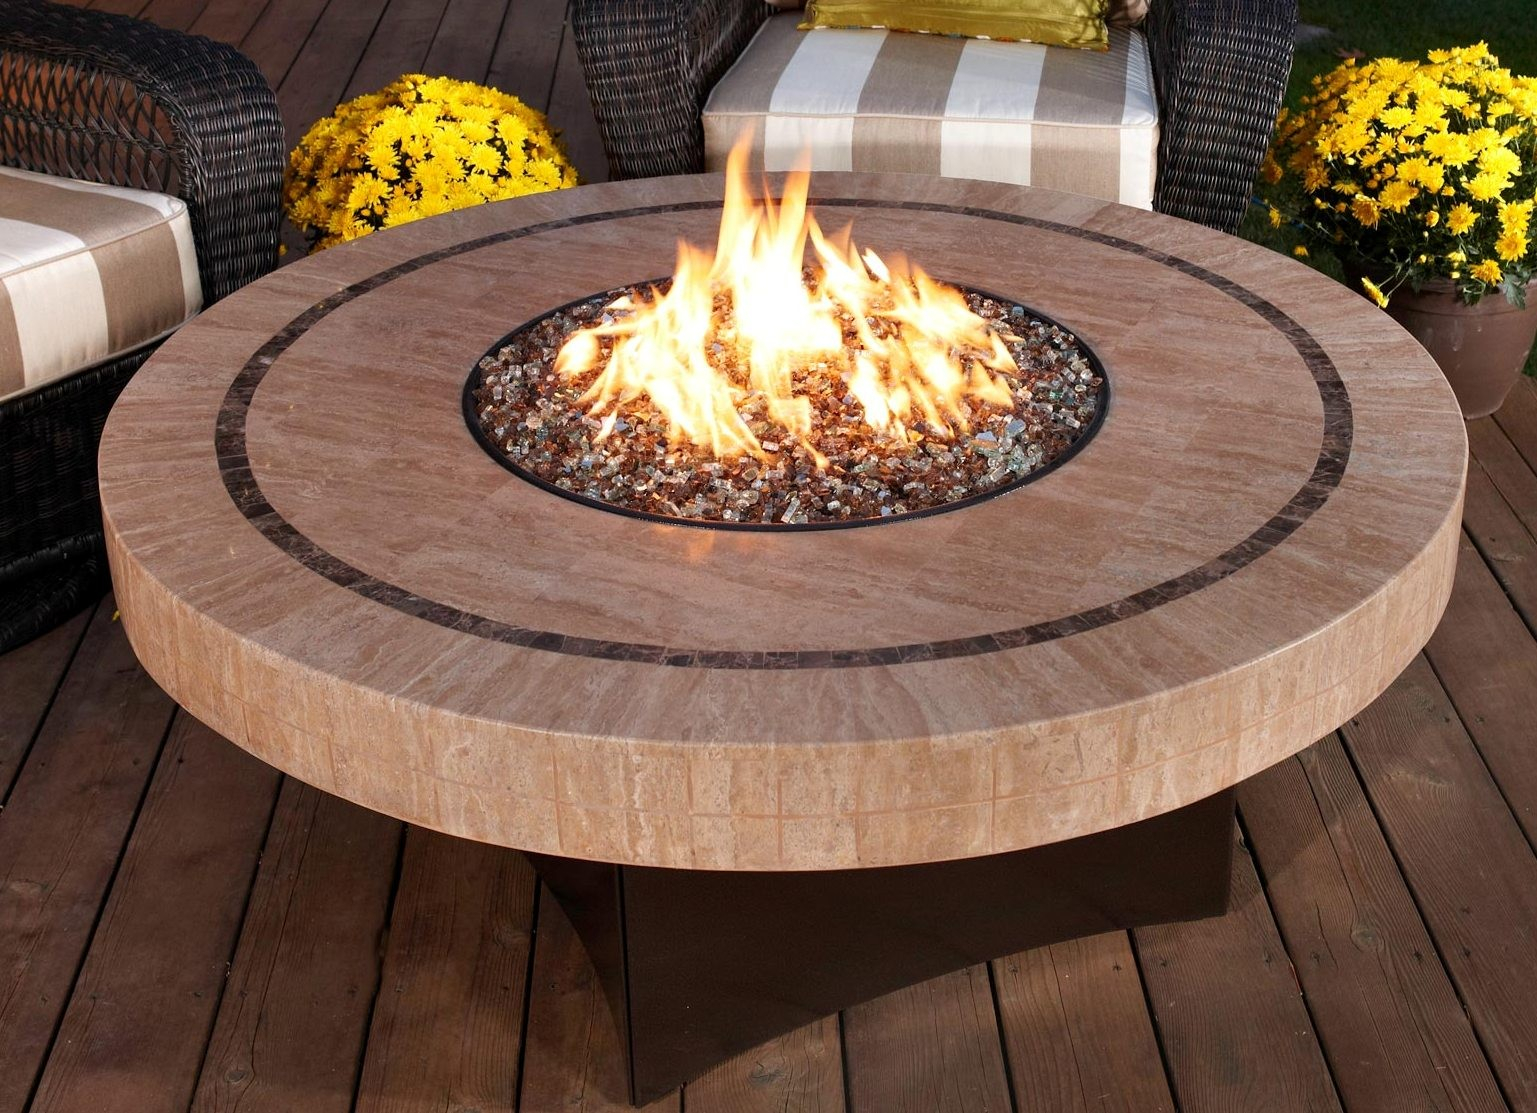 Patio Natural Gas Fire Pit • Knobs Ideas Site